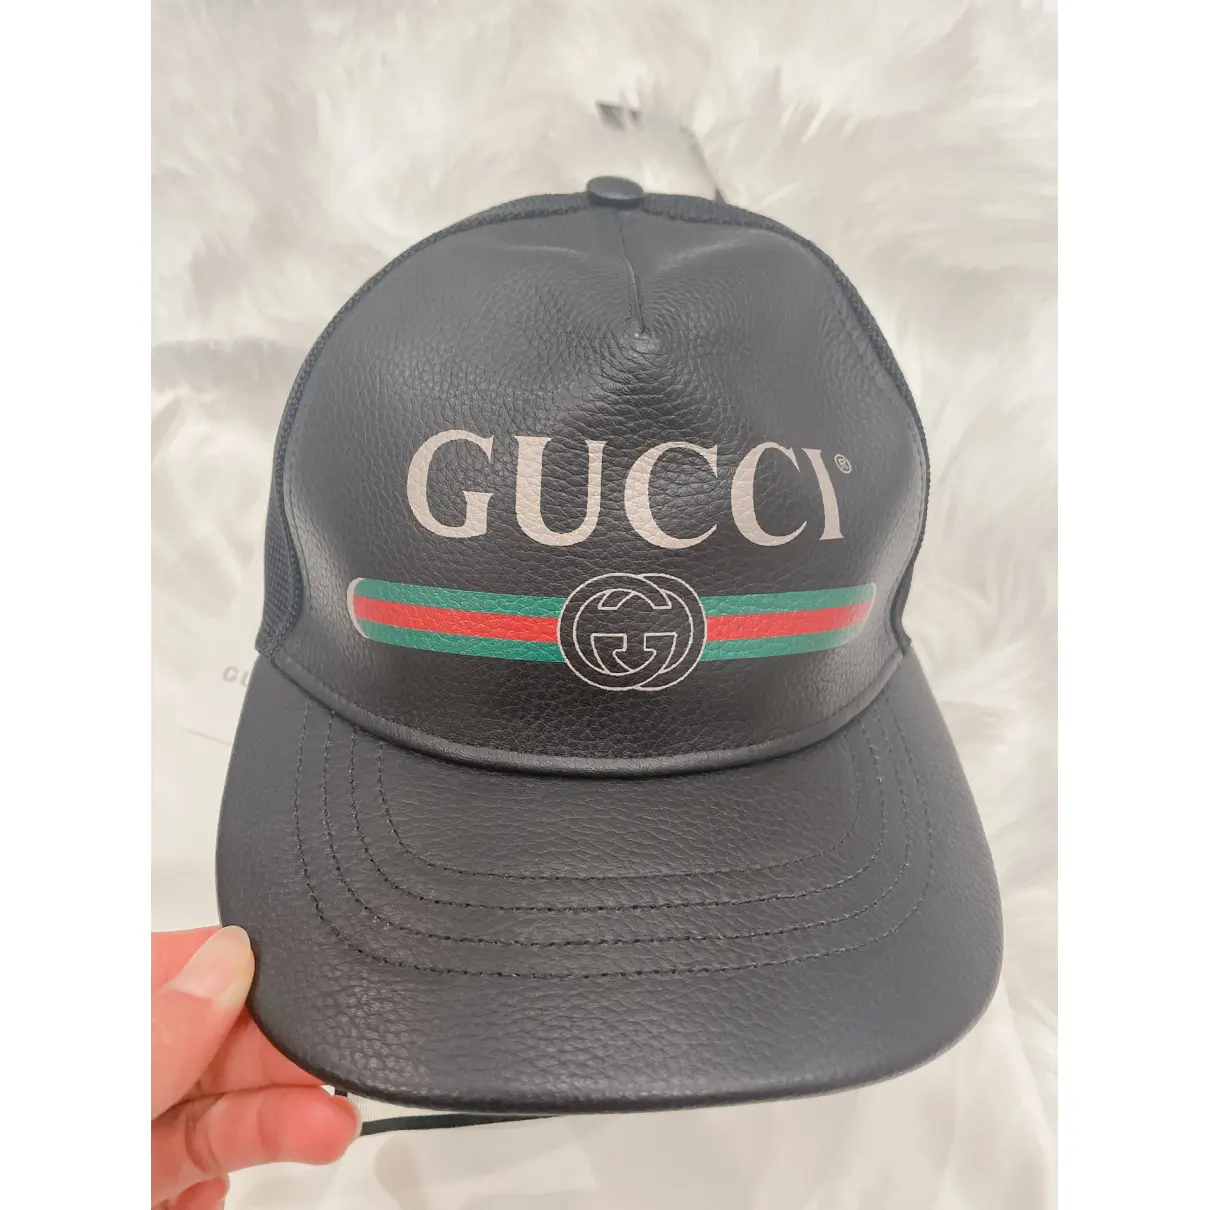 Buy Gucci Leather hat online